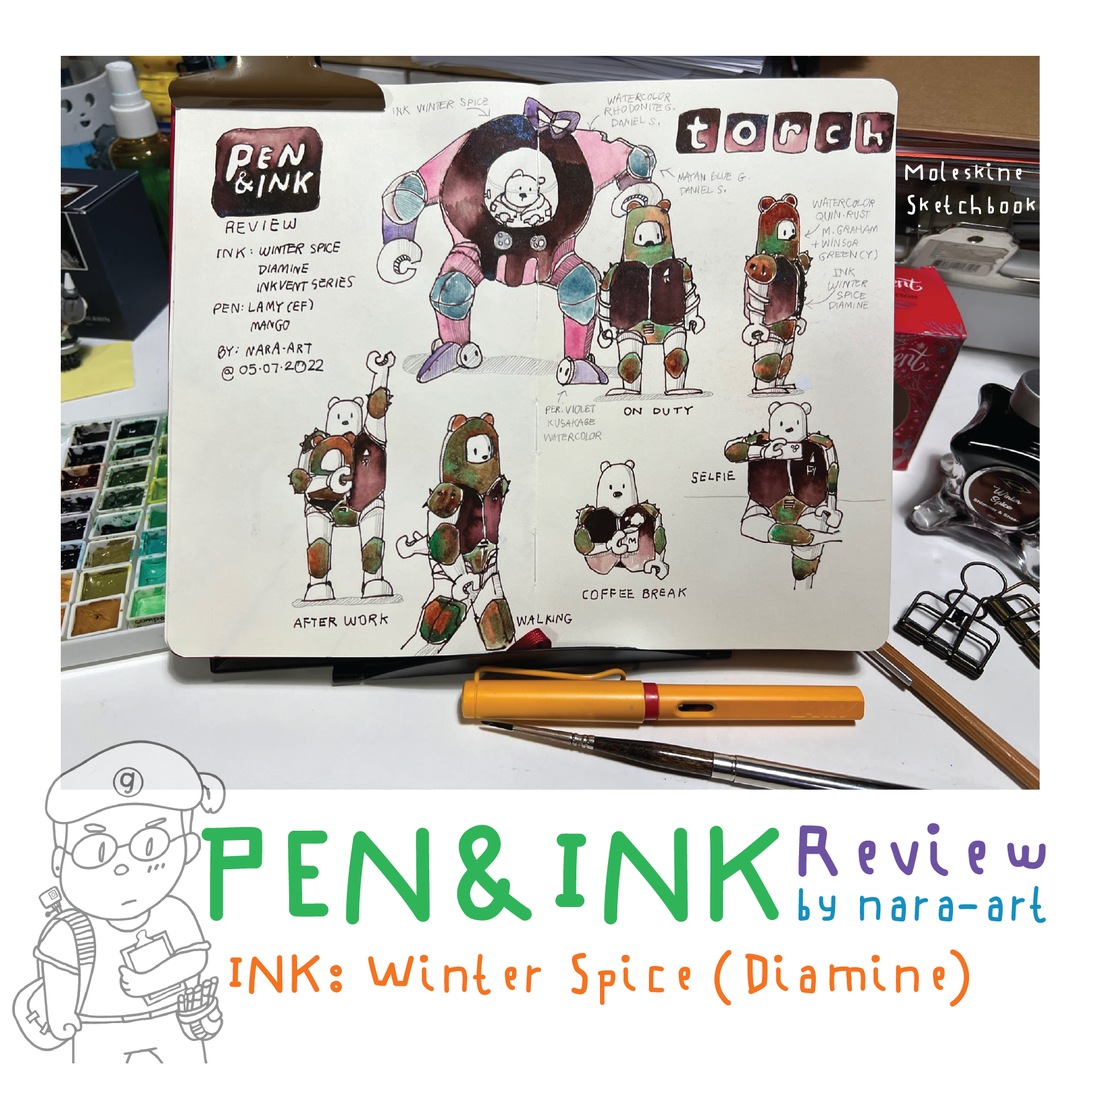 Ink Review Winter Spice Diamine on Coated Paper, PaperMood & Moleskine Sketchbook by Pen Lamy EF Nib